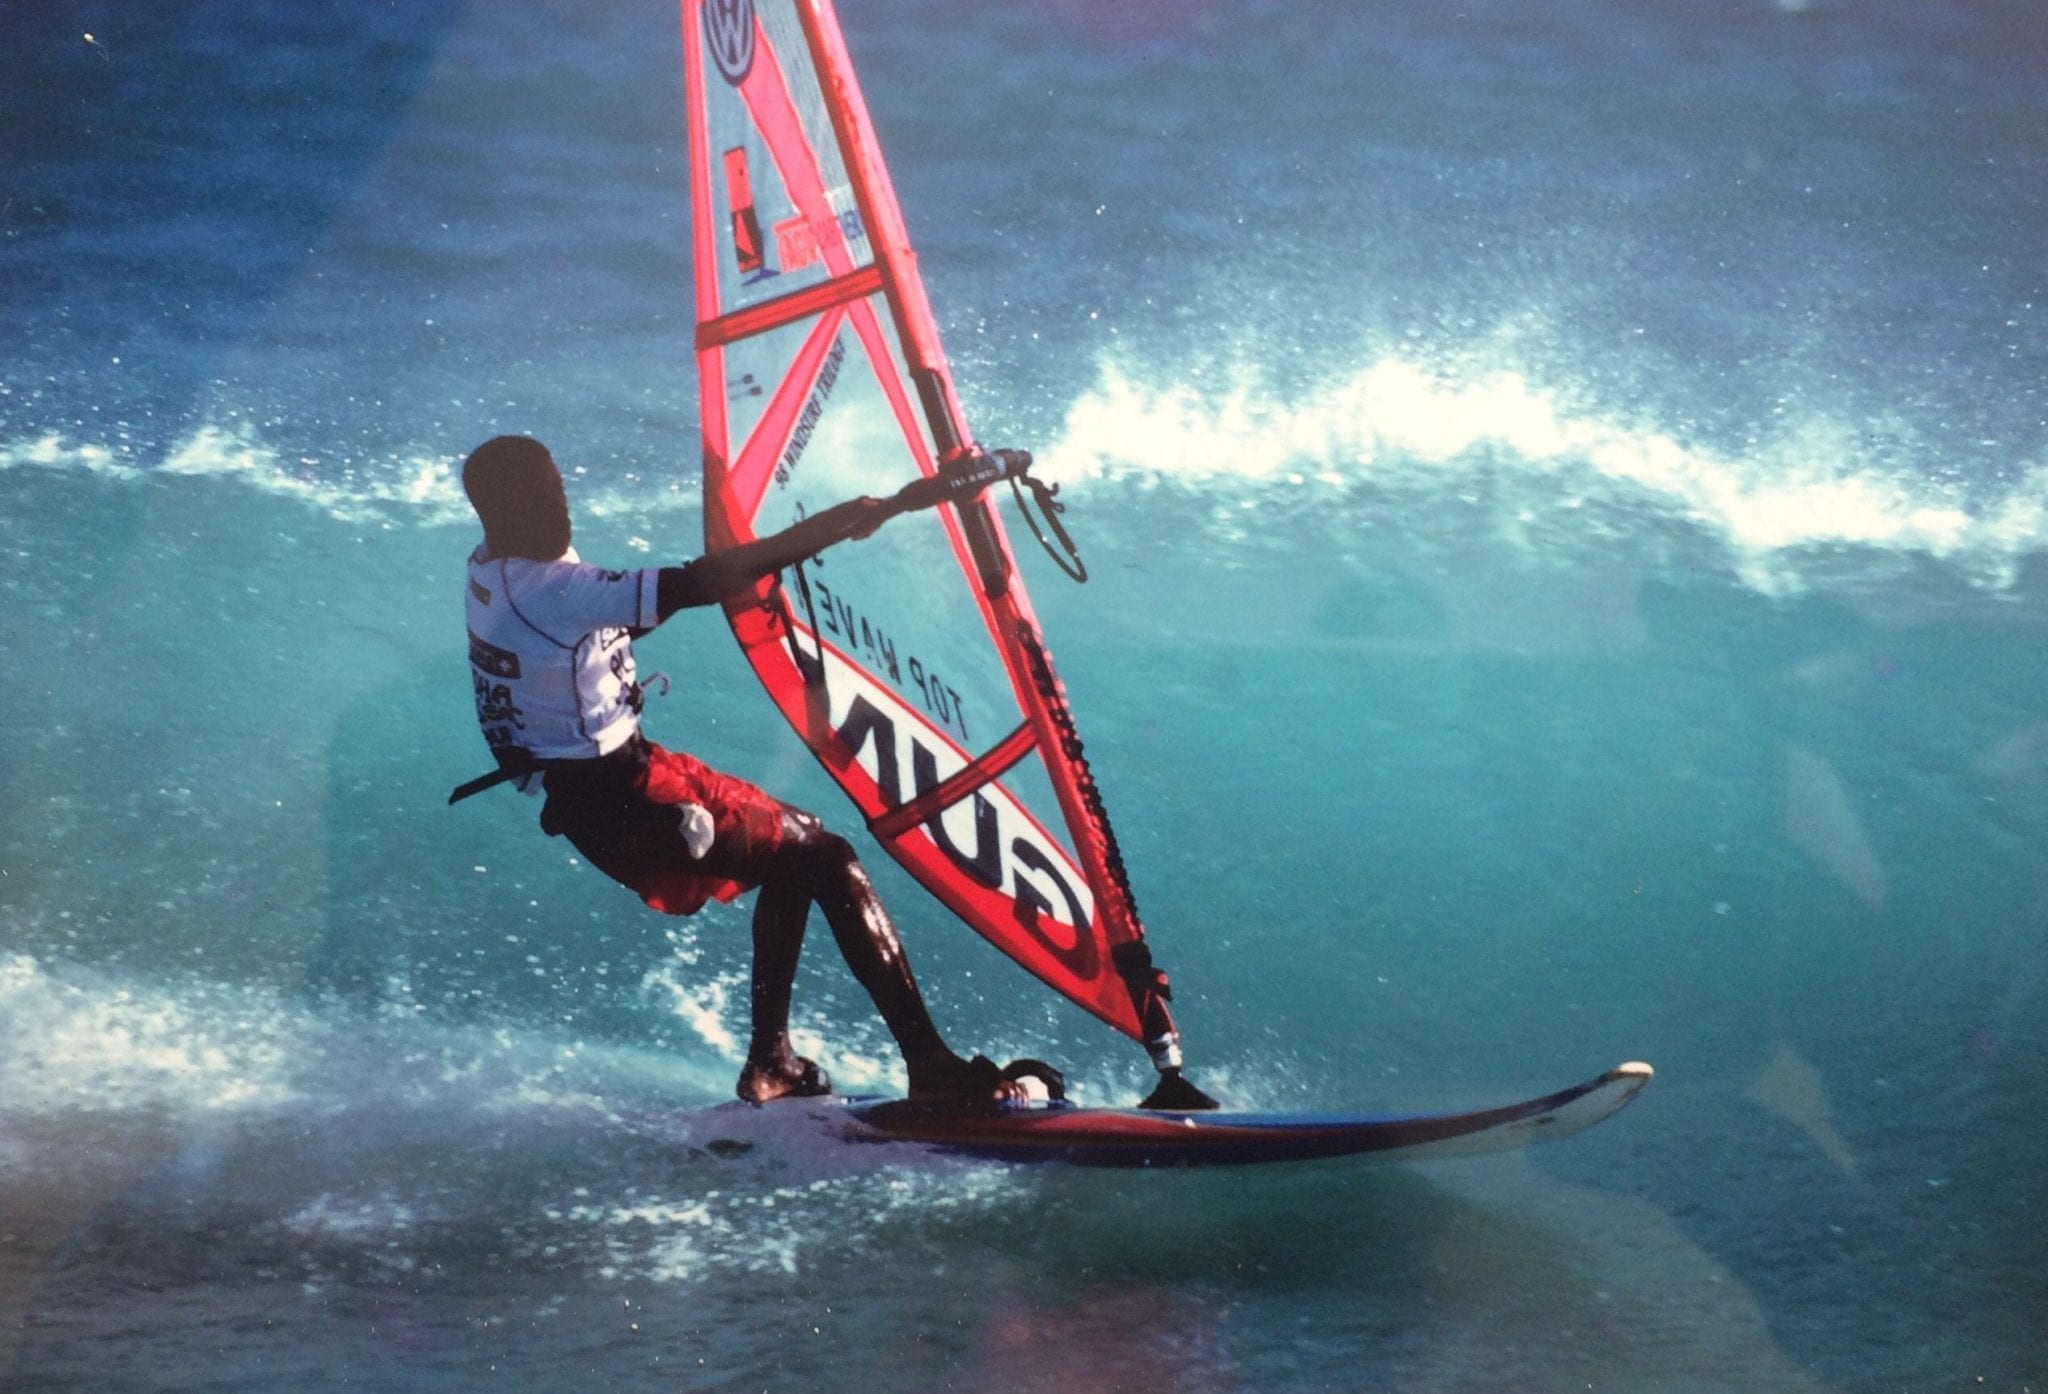 Mitu’s windsurfing career was more than just a placeholder before kitesurfing; the crossover fueled his early kite progression. Photo Monteiro Family